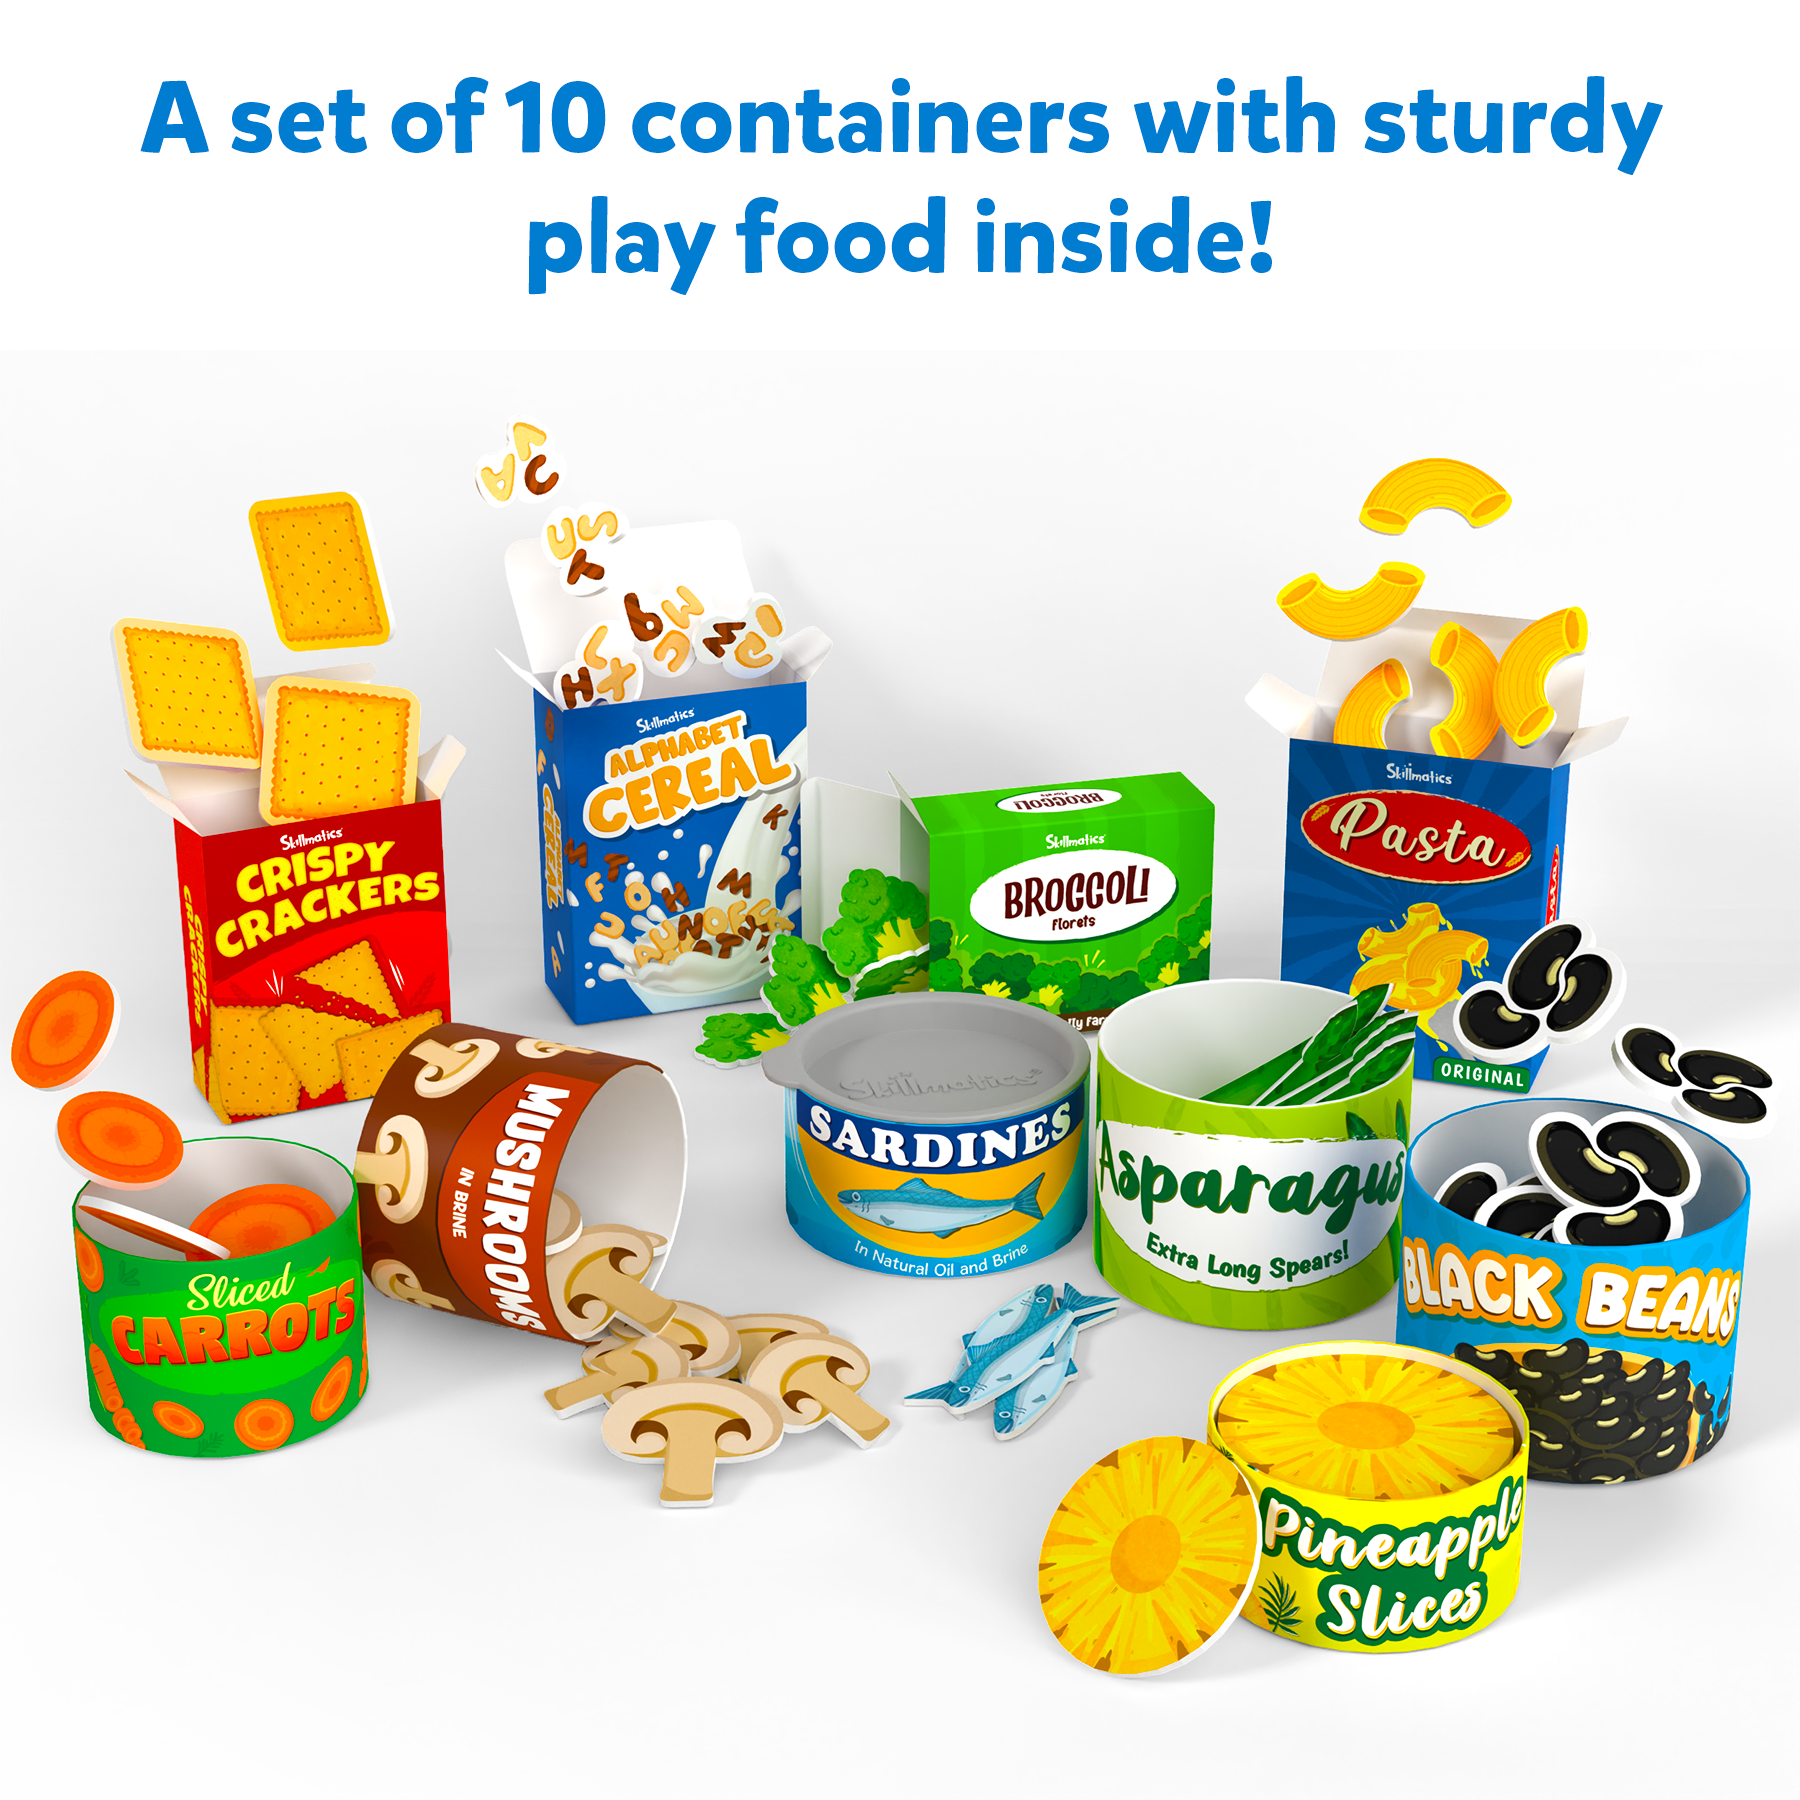 Skillmatics Grocery Set - 100+ Pieces, 10 Containers with Play Food Inside, Realistic Pretend Play Toys for Kids Kitchen Set, Gift for Girls & Boys Ages 3 & Up